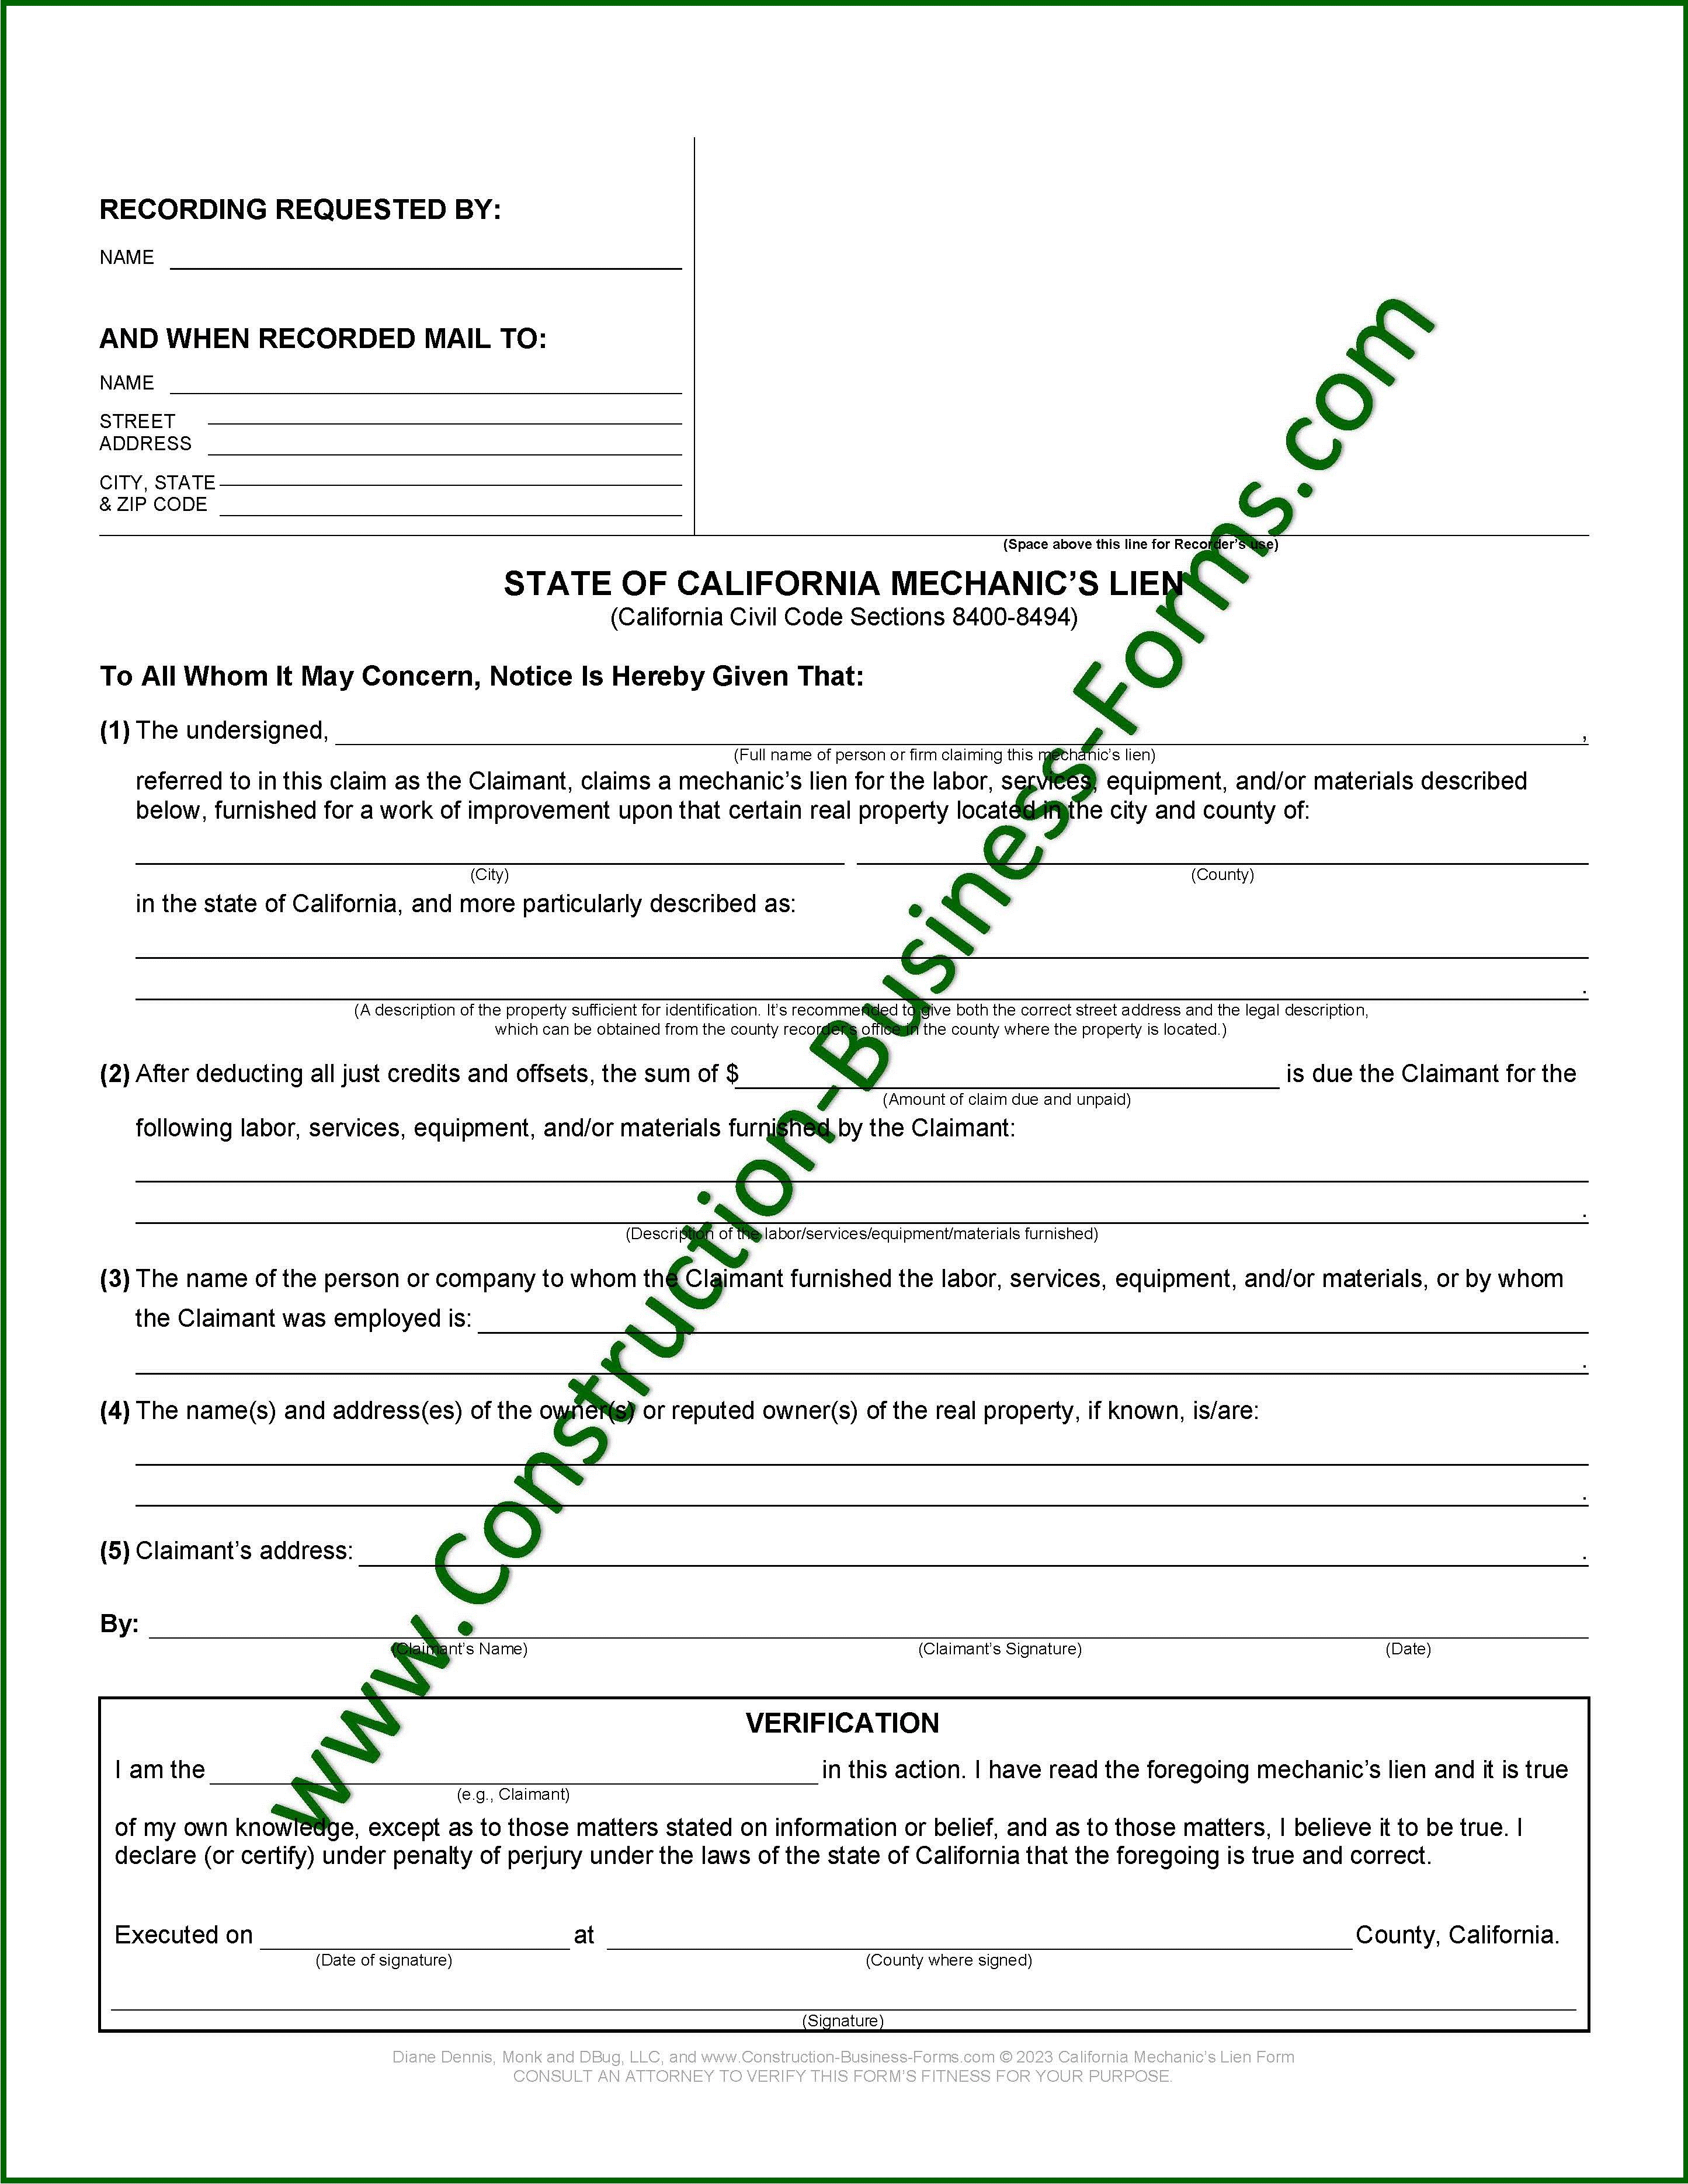 Image of, and link to, mechanics lien form.